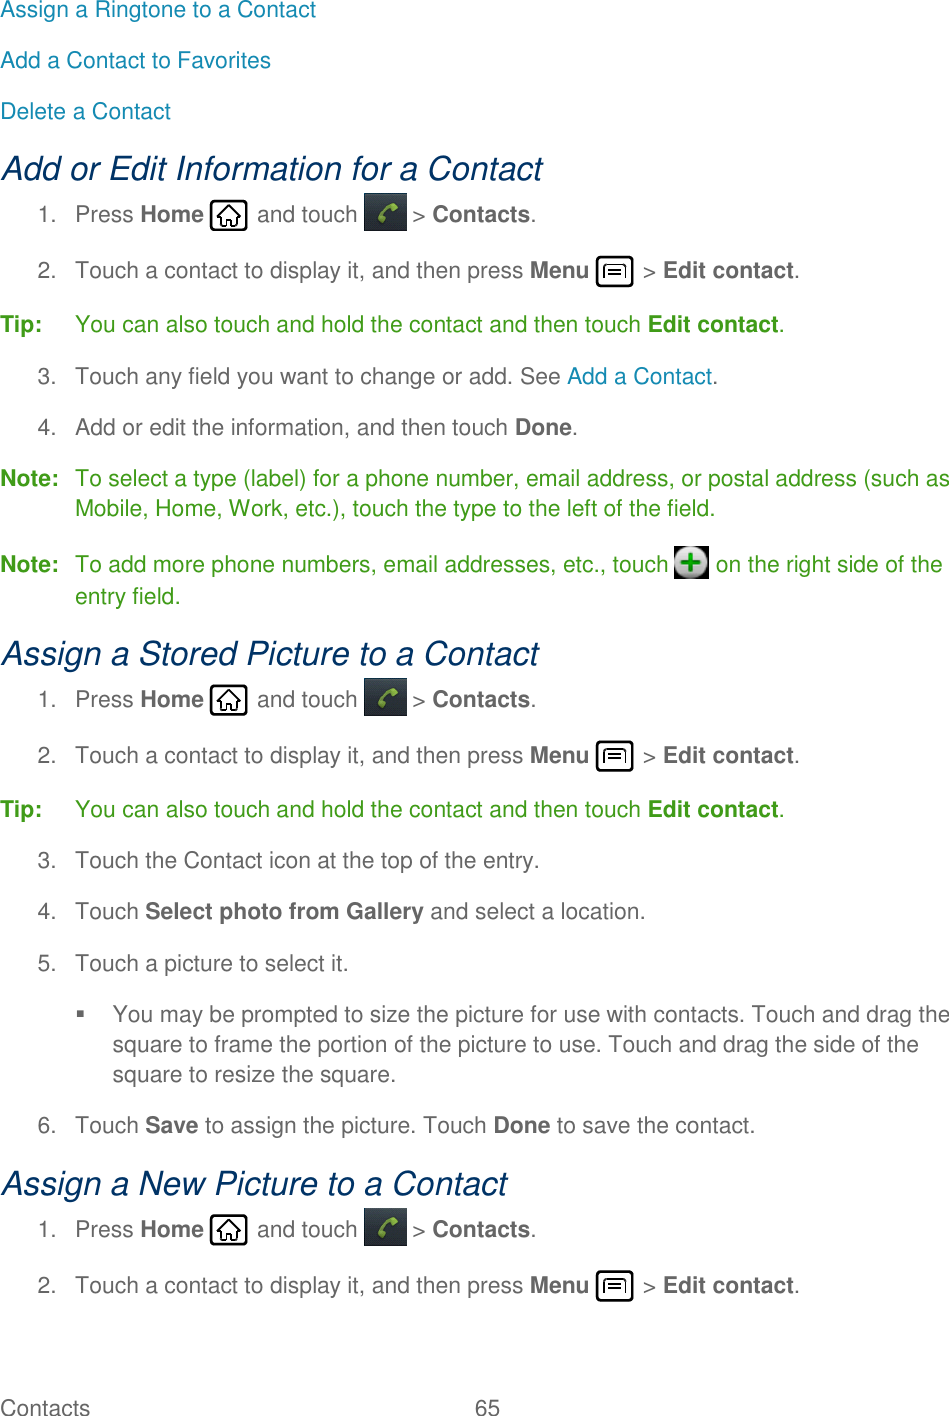 Contacts  65   Assign a Ringtone to a Contact Add a Contact to Favorites Delete a Contact Add or Edit Information for a Contact 1.  Press Home   and touch  &gt; Contacts. 2.  Touch a contact to display it, and then press Menu   &gt; Edit contact. Tip:  You can also touch and hold the contact and then touch Edit contact. 3.  Touch any field you want to change or add. See Add a Contact. 4.  Add or edit the information, and then touch Done. Note:  To select a type (label) for a phone number, email address, or postal address (such as Mobile, Home, Work, etc.), touch the type to the left of the field. Note:  To add more phone numbers, email addresses, etc., touch   on the right side of the entry field. Assign a Stored Picture to a Contact 1.  Press Home   and touch  &gt; Contacts. 2.  Touch a contact to display it, and then press Menu   &gt; Edit contact. Tip:  You can also touch and hold the contact and then touch Edit contact. 3.  Touch the Contact icon at the top of the entry. 4.  Touch Select photo from Gallery and select a location. 5.  Touch a picture to select it.   You may be prompted to size the picture for use with contacts. Touch and drag the square to frame the portion of the picture to use. Touch and drag the side of the square to resize the square. 6.  Touch Save to assign the picture. Touch Done to save the contact. Assign a New Picture to a Contact 1.  Press Home   and touch  &gt; Contacts. 2.  Touch a contact to display it, and then press Menu   &gt; Edit contact. 